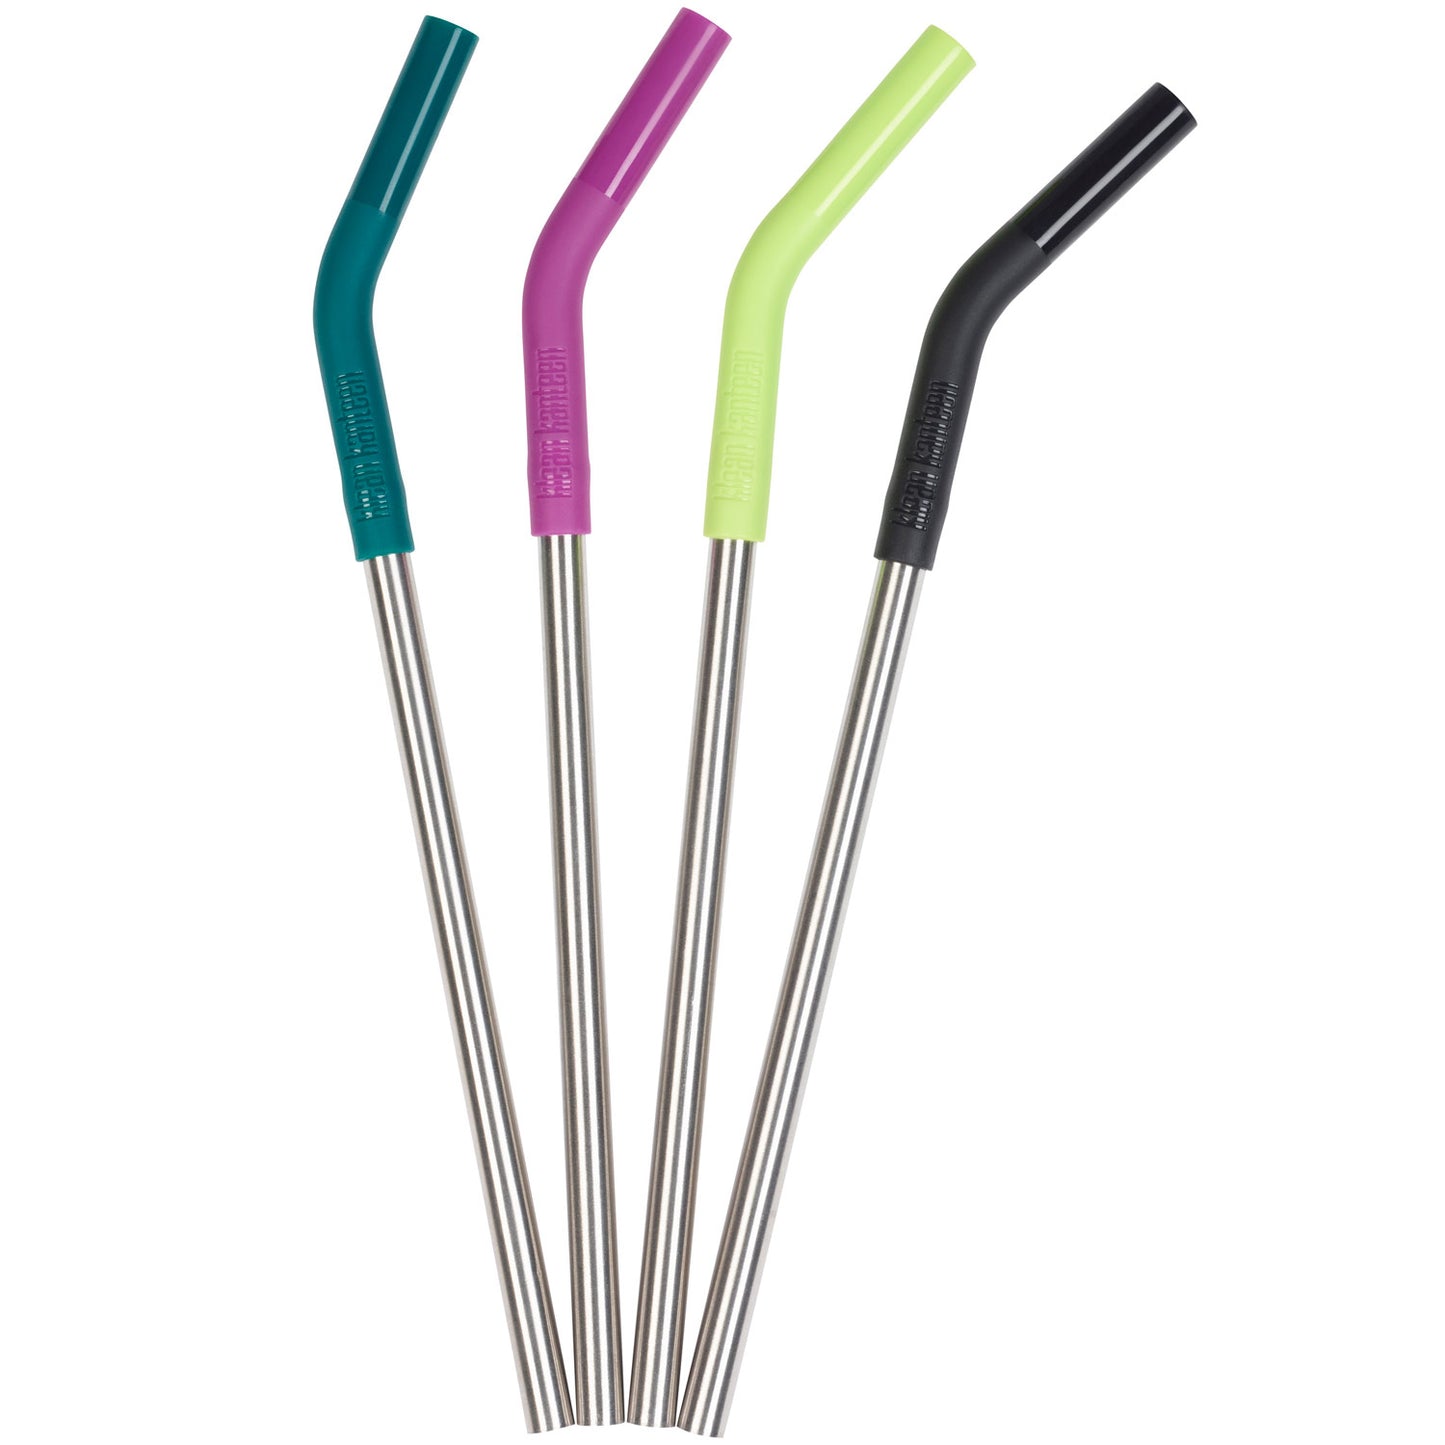 Straw 4 Pack - 8mm Multi Color